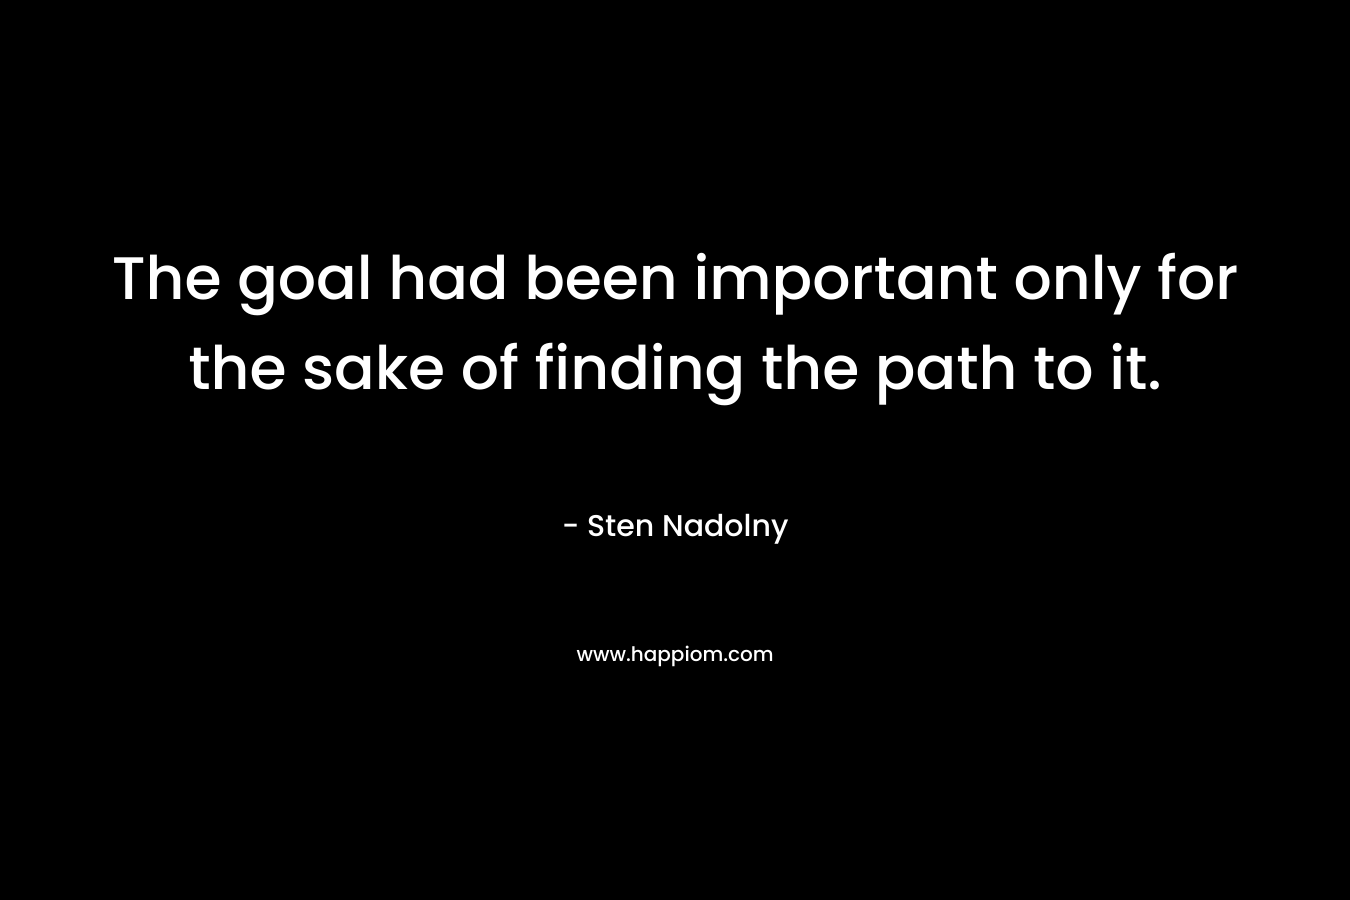 The goal had been important only for the sake of finding the path to it. – Sten Nadolny